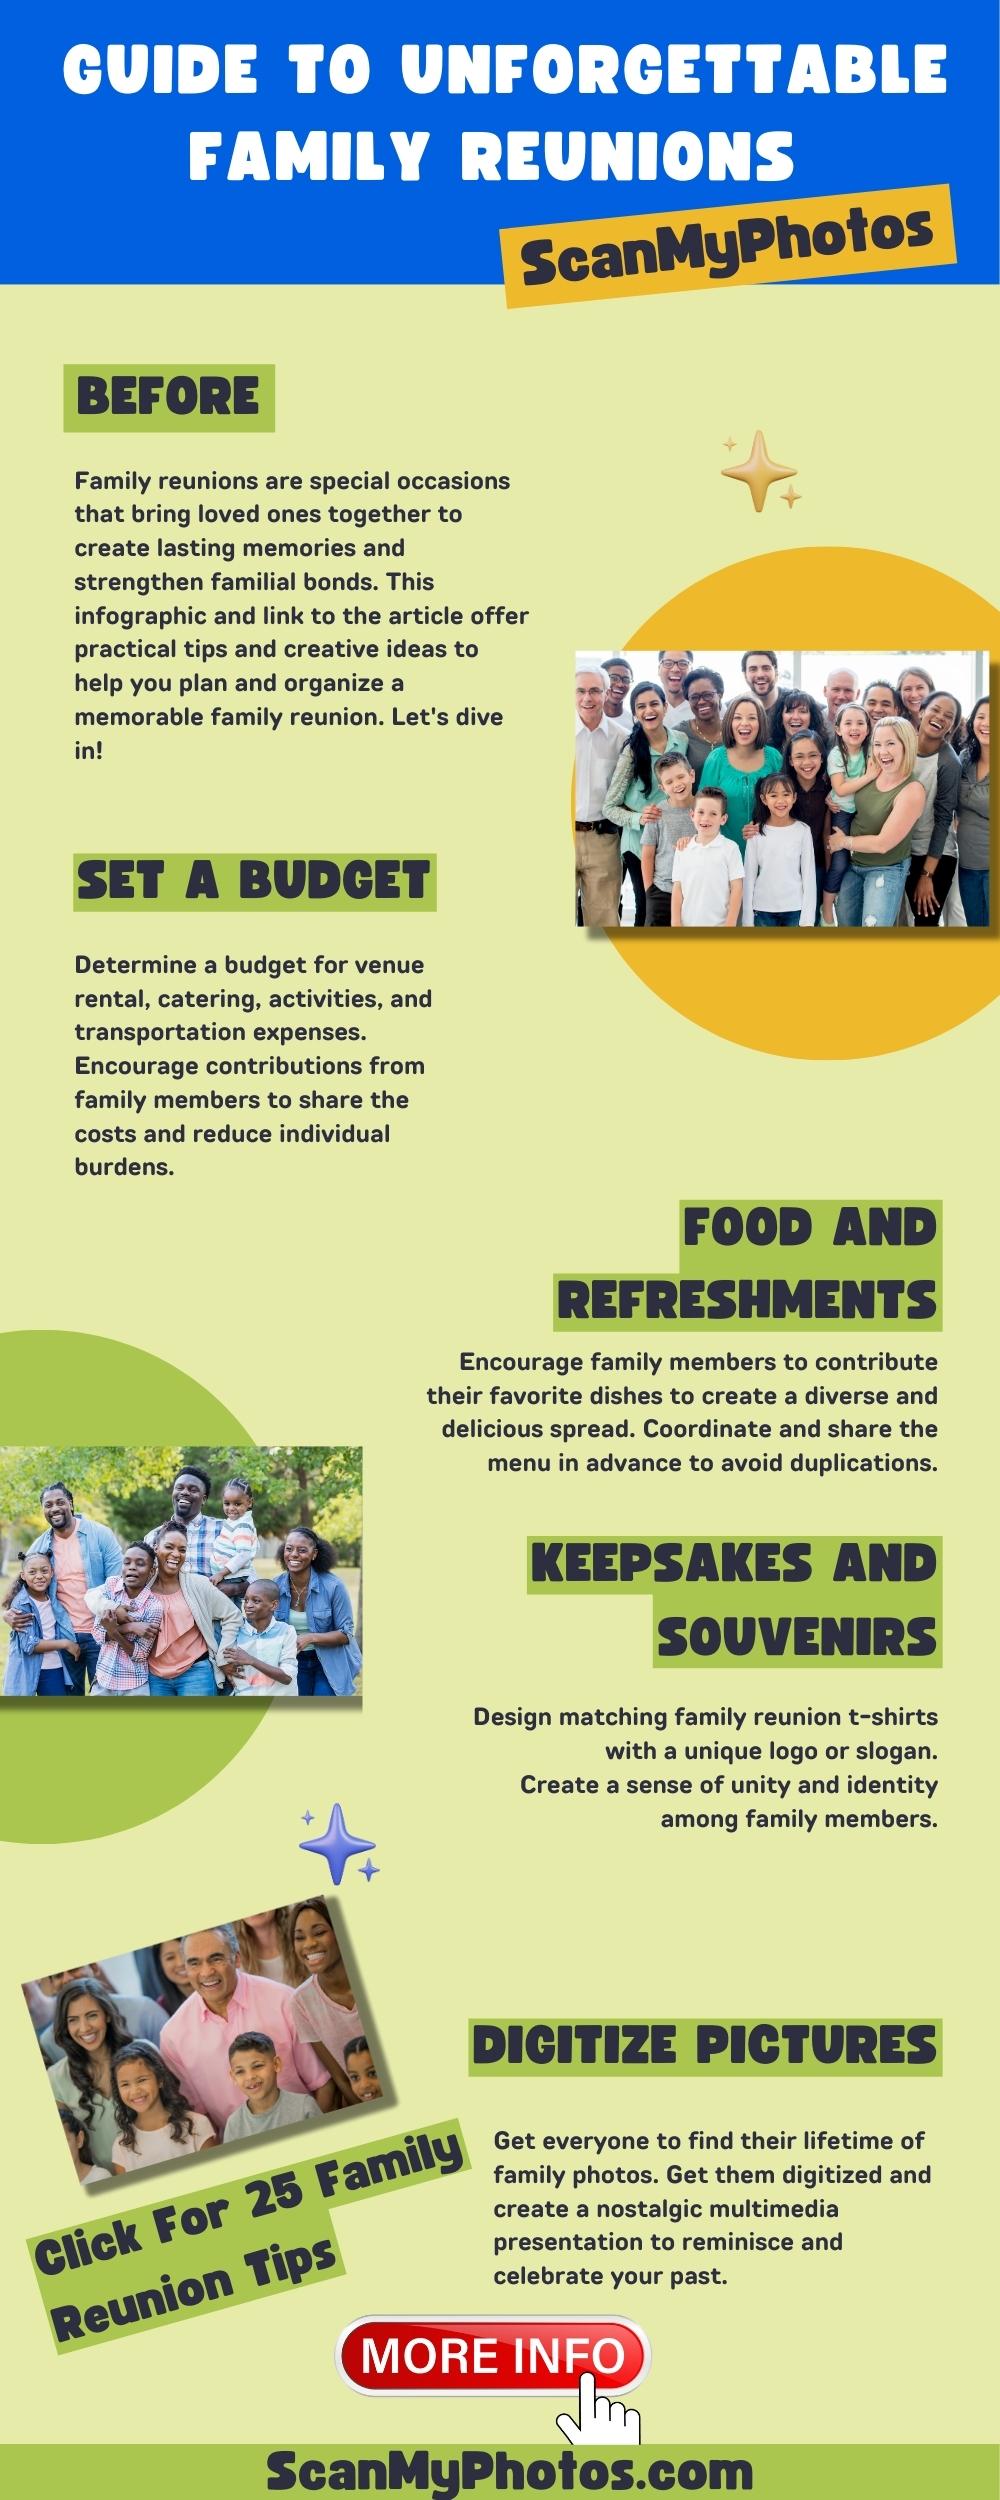 reunion601 - Celebrating Family: 35 Tips & Infographic Guide to Unforgettable Family Reunions